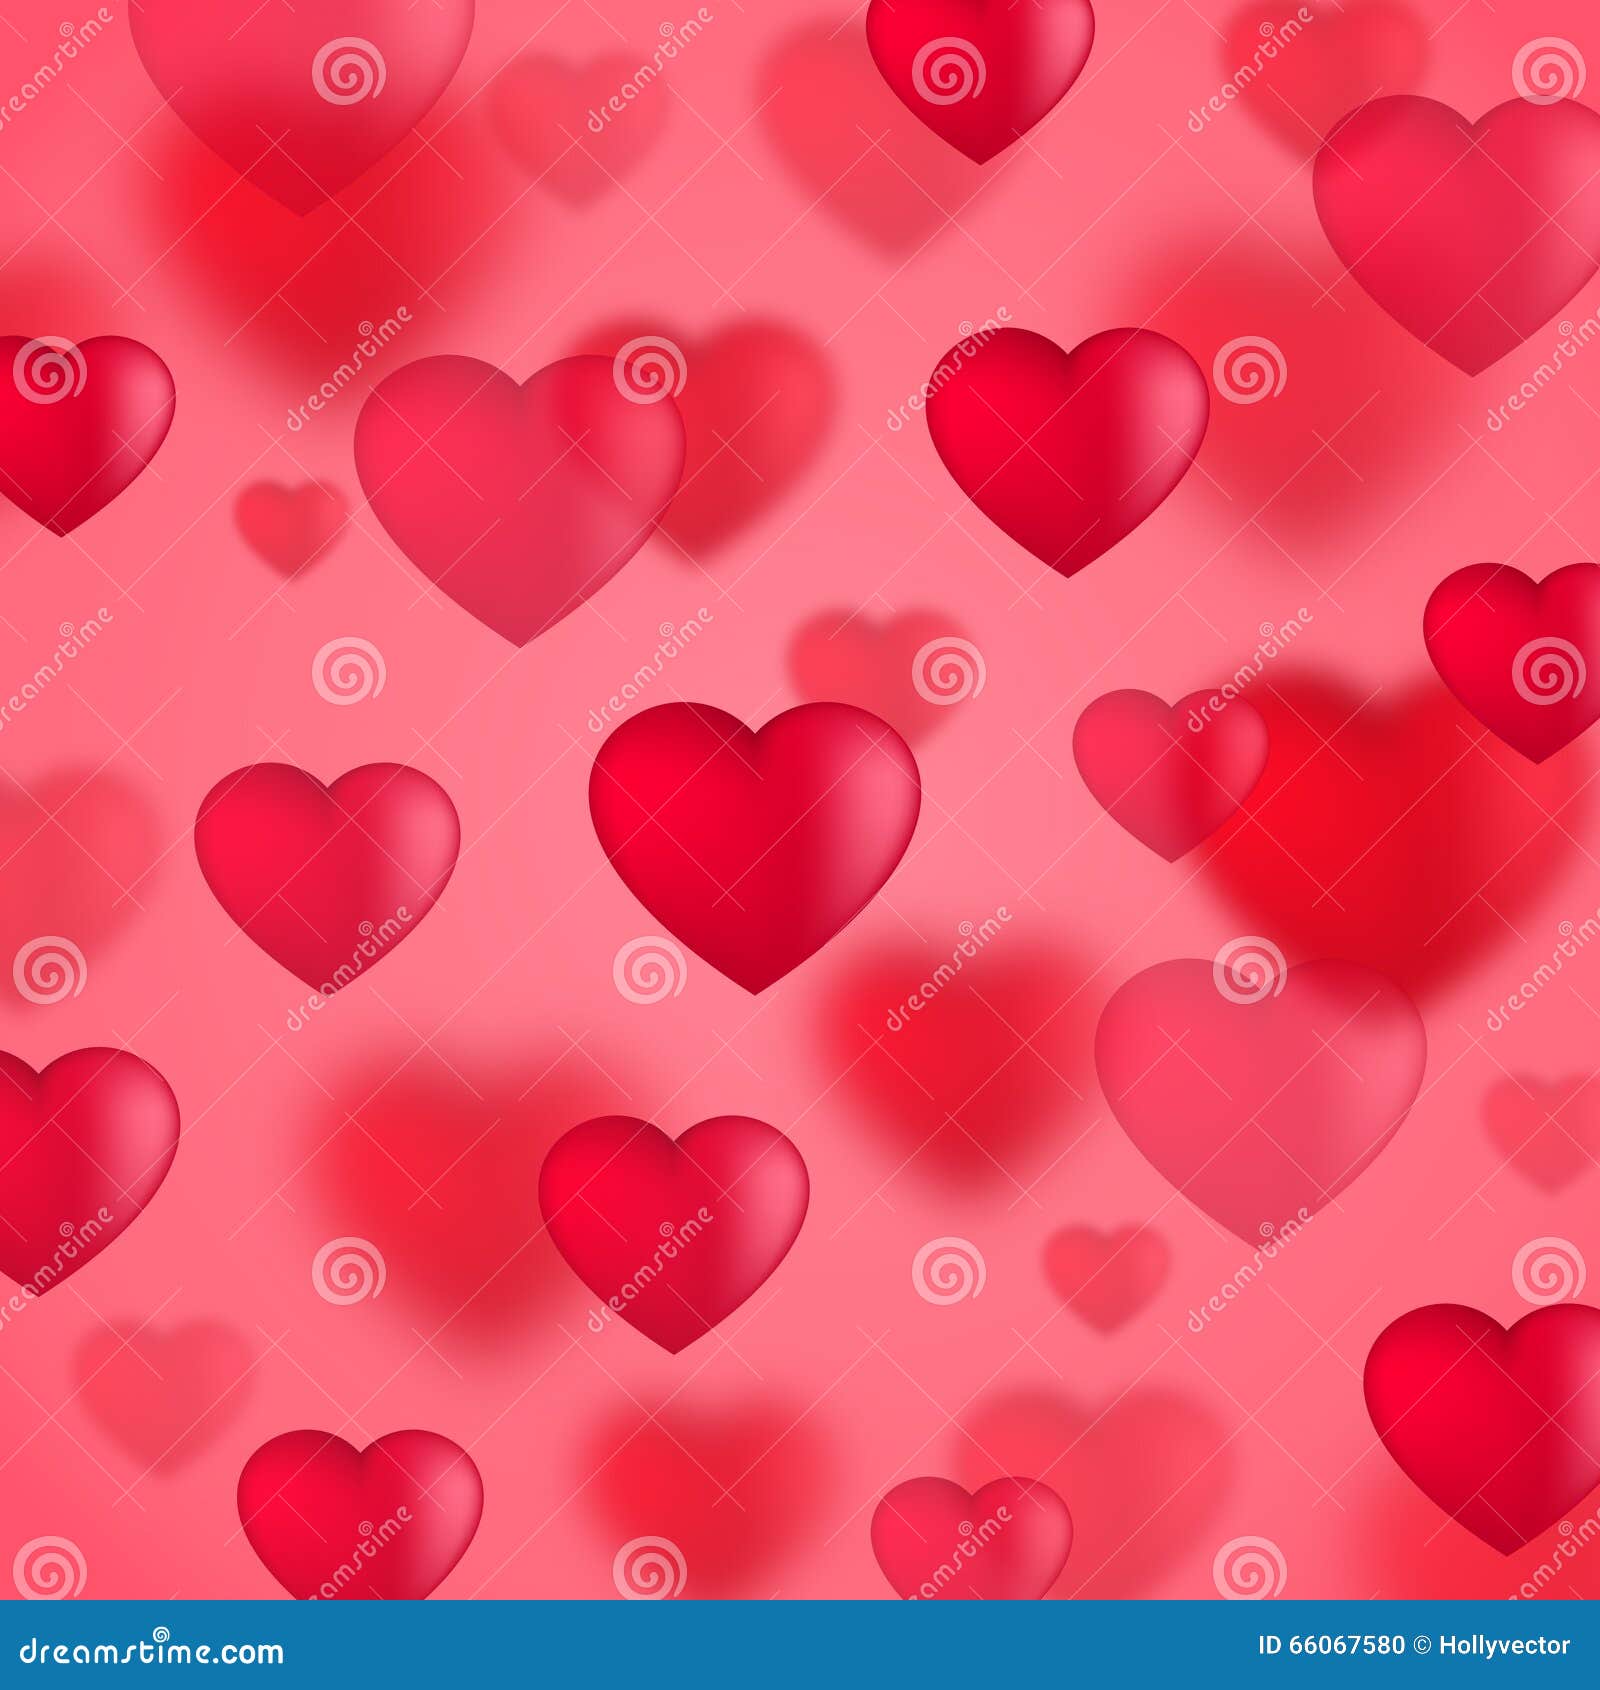 Red Valentine Hearts Background Stock Vector - Illustration of heart ...